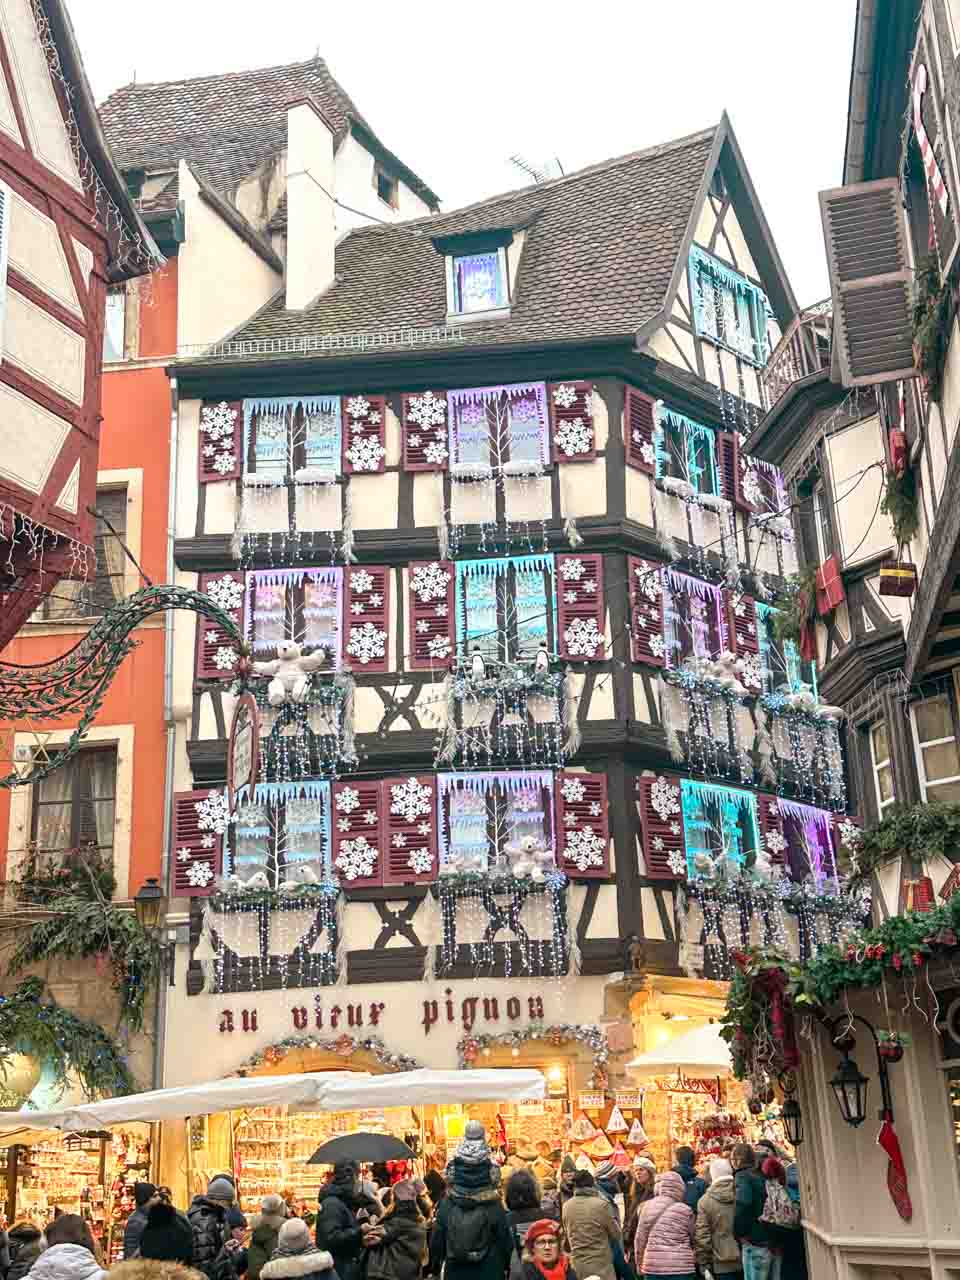 A half-timbered building in Colmar adorned with snowflake decorations and Christmas garlands, with the sign 'Au Vieux Pignon' and a crowd of market-goers in front